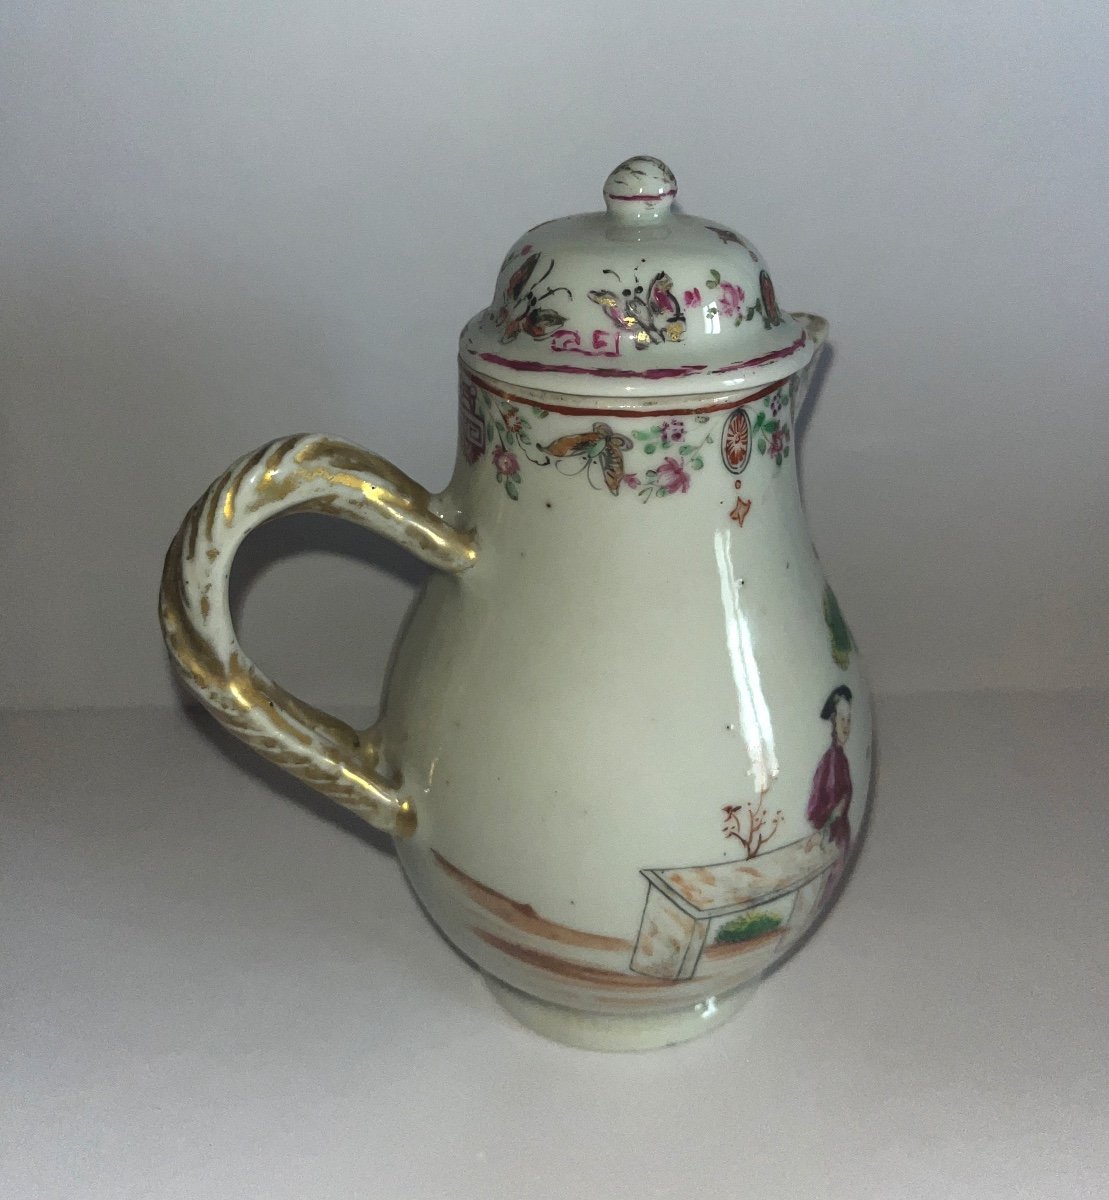 Creamer Compagnie Des Indes  With Chinese Decor From The End Of 17th Century, Beginning Of The 18th Century-photo-4